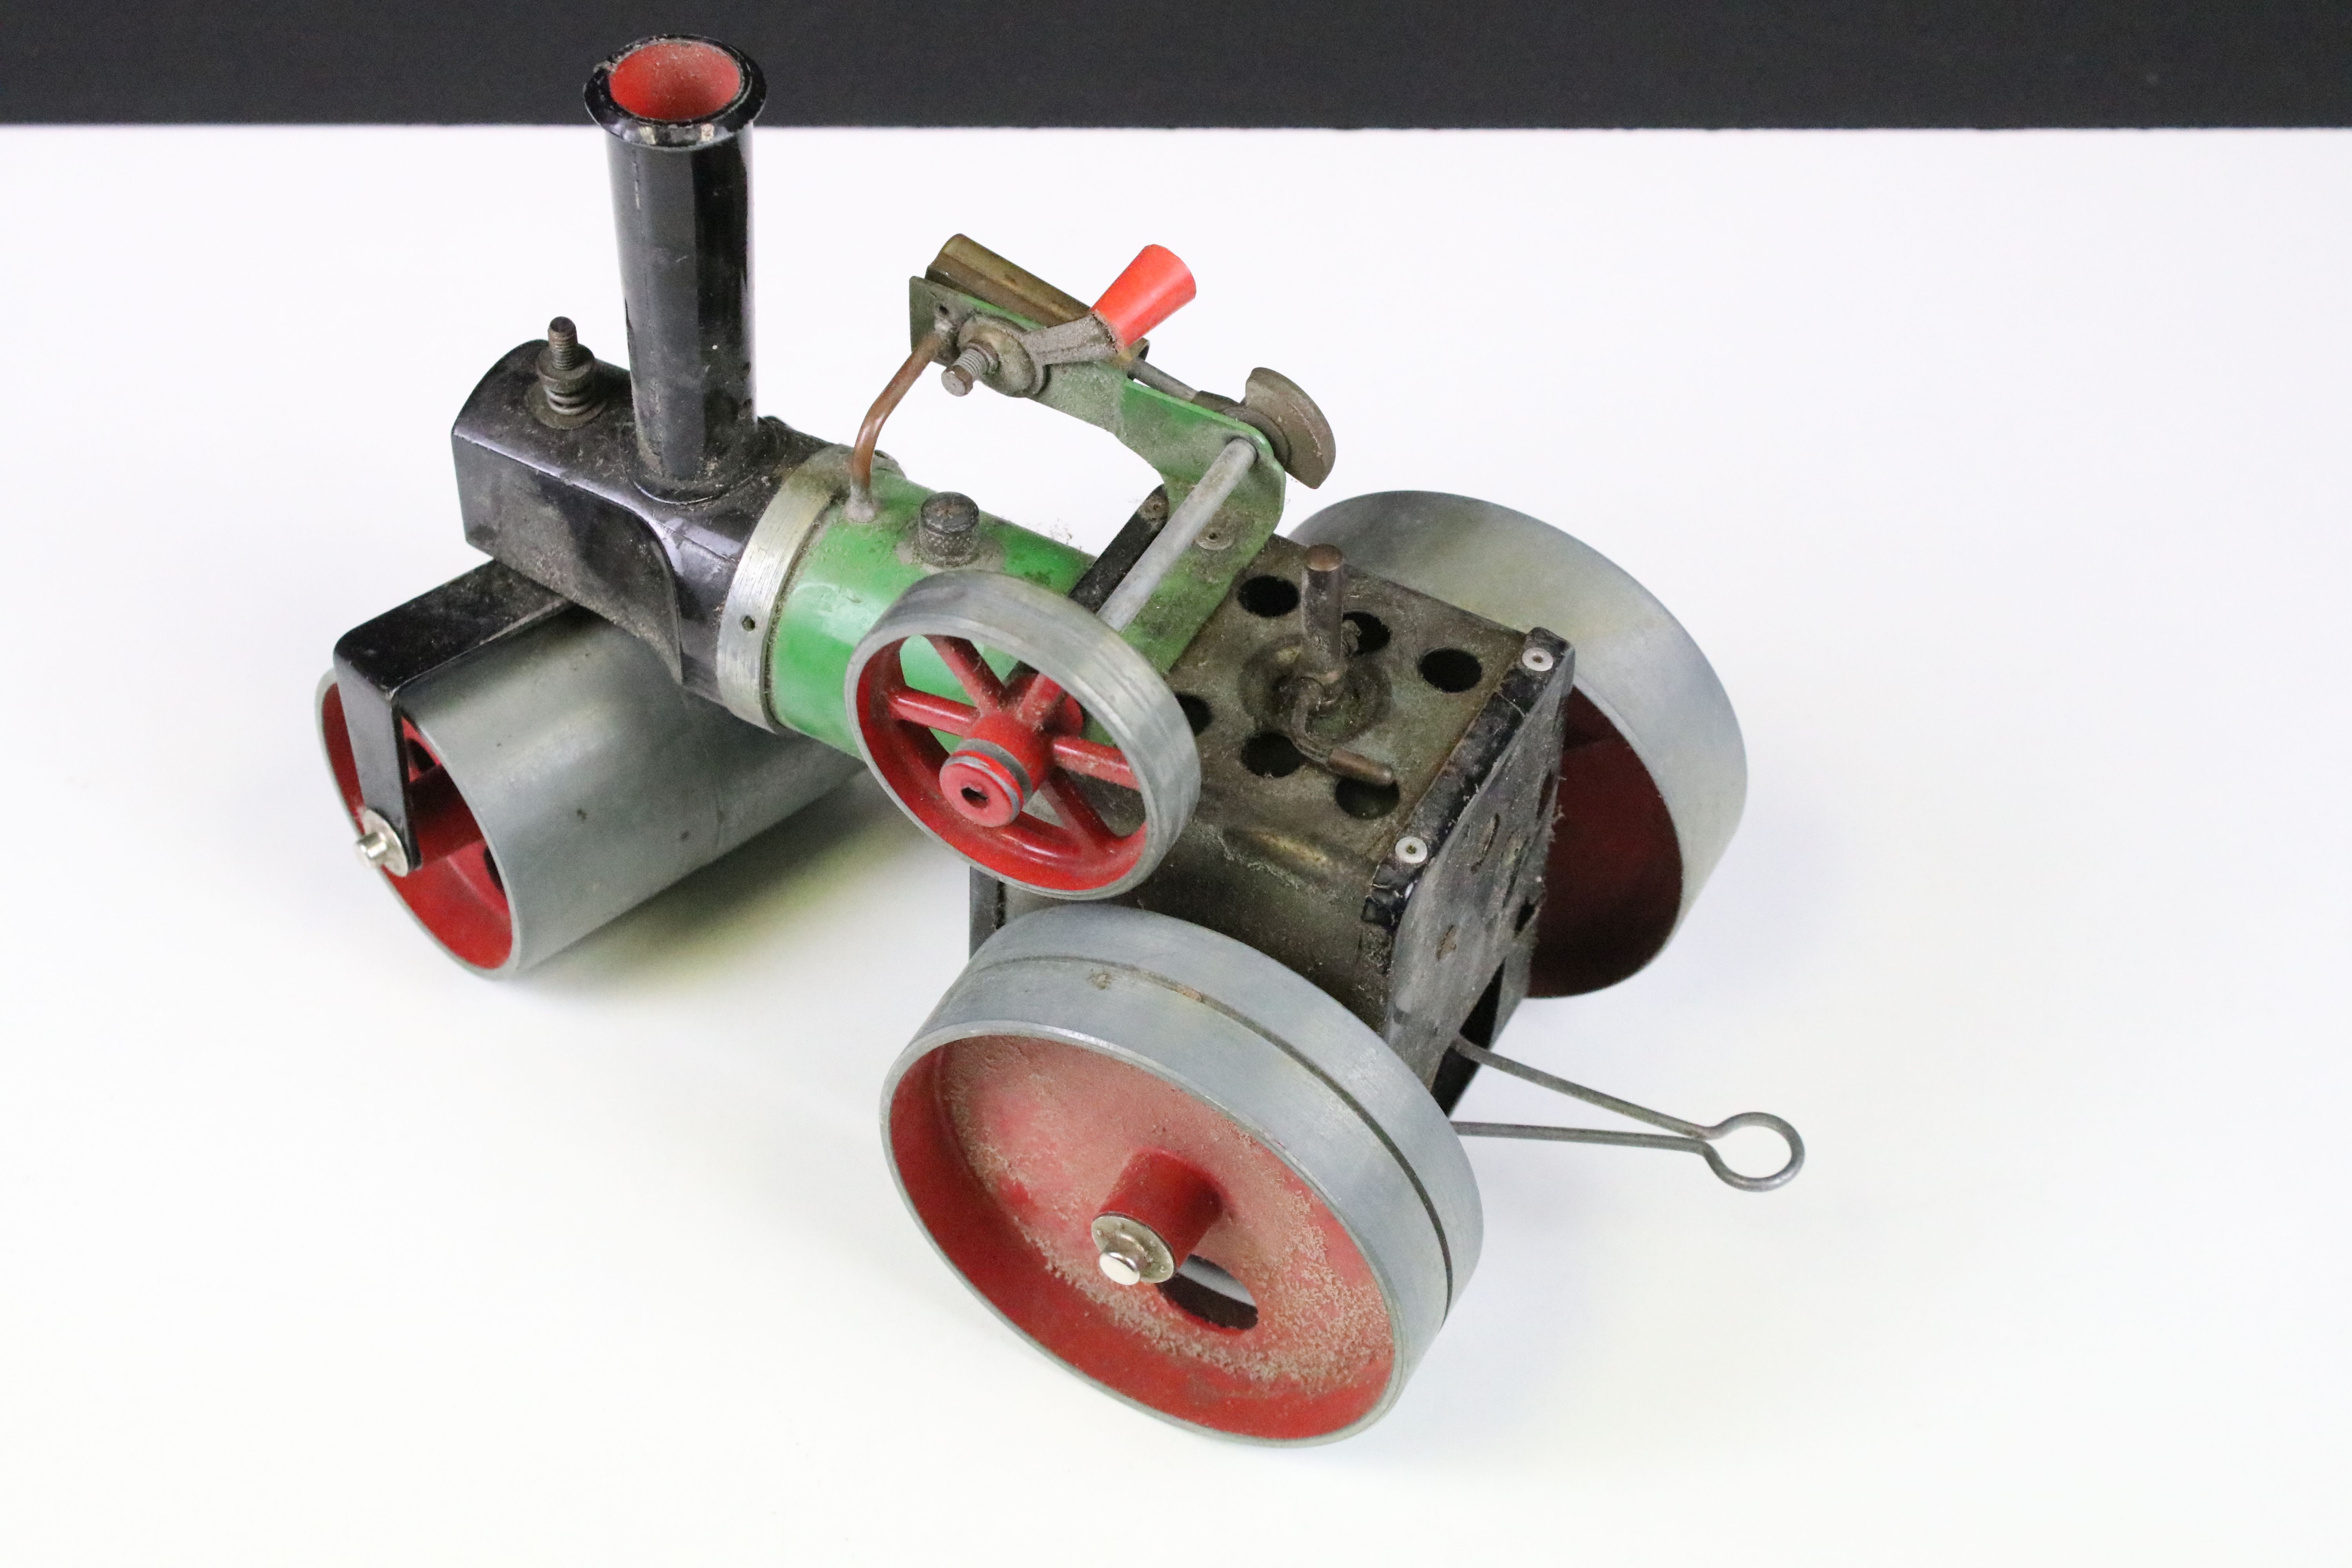 Steam Engine - Two steam engine models featuring Mamod SR1 steam roller traction engine, with - Image 5 of 5